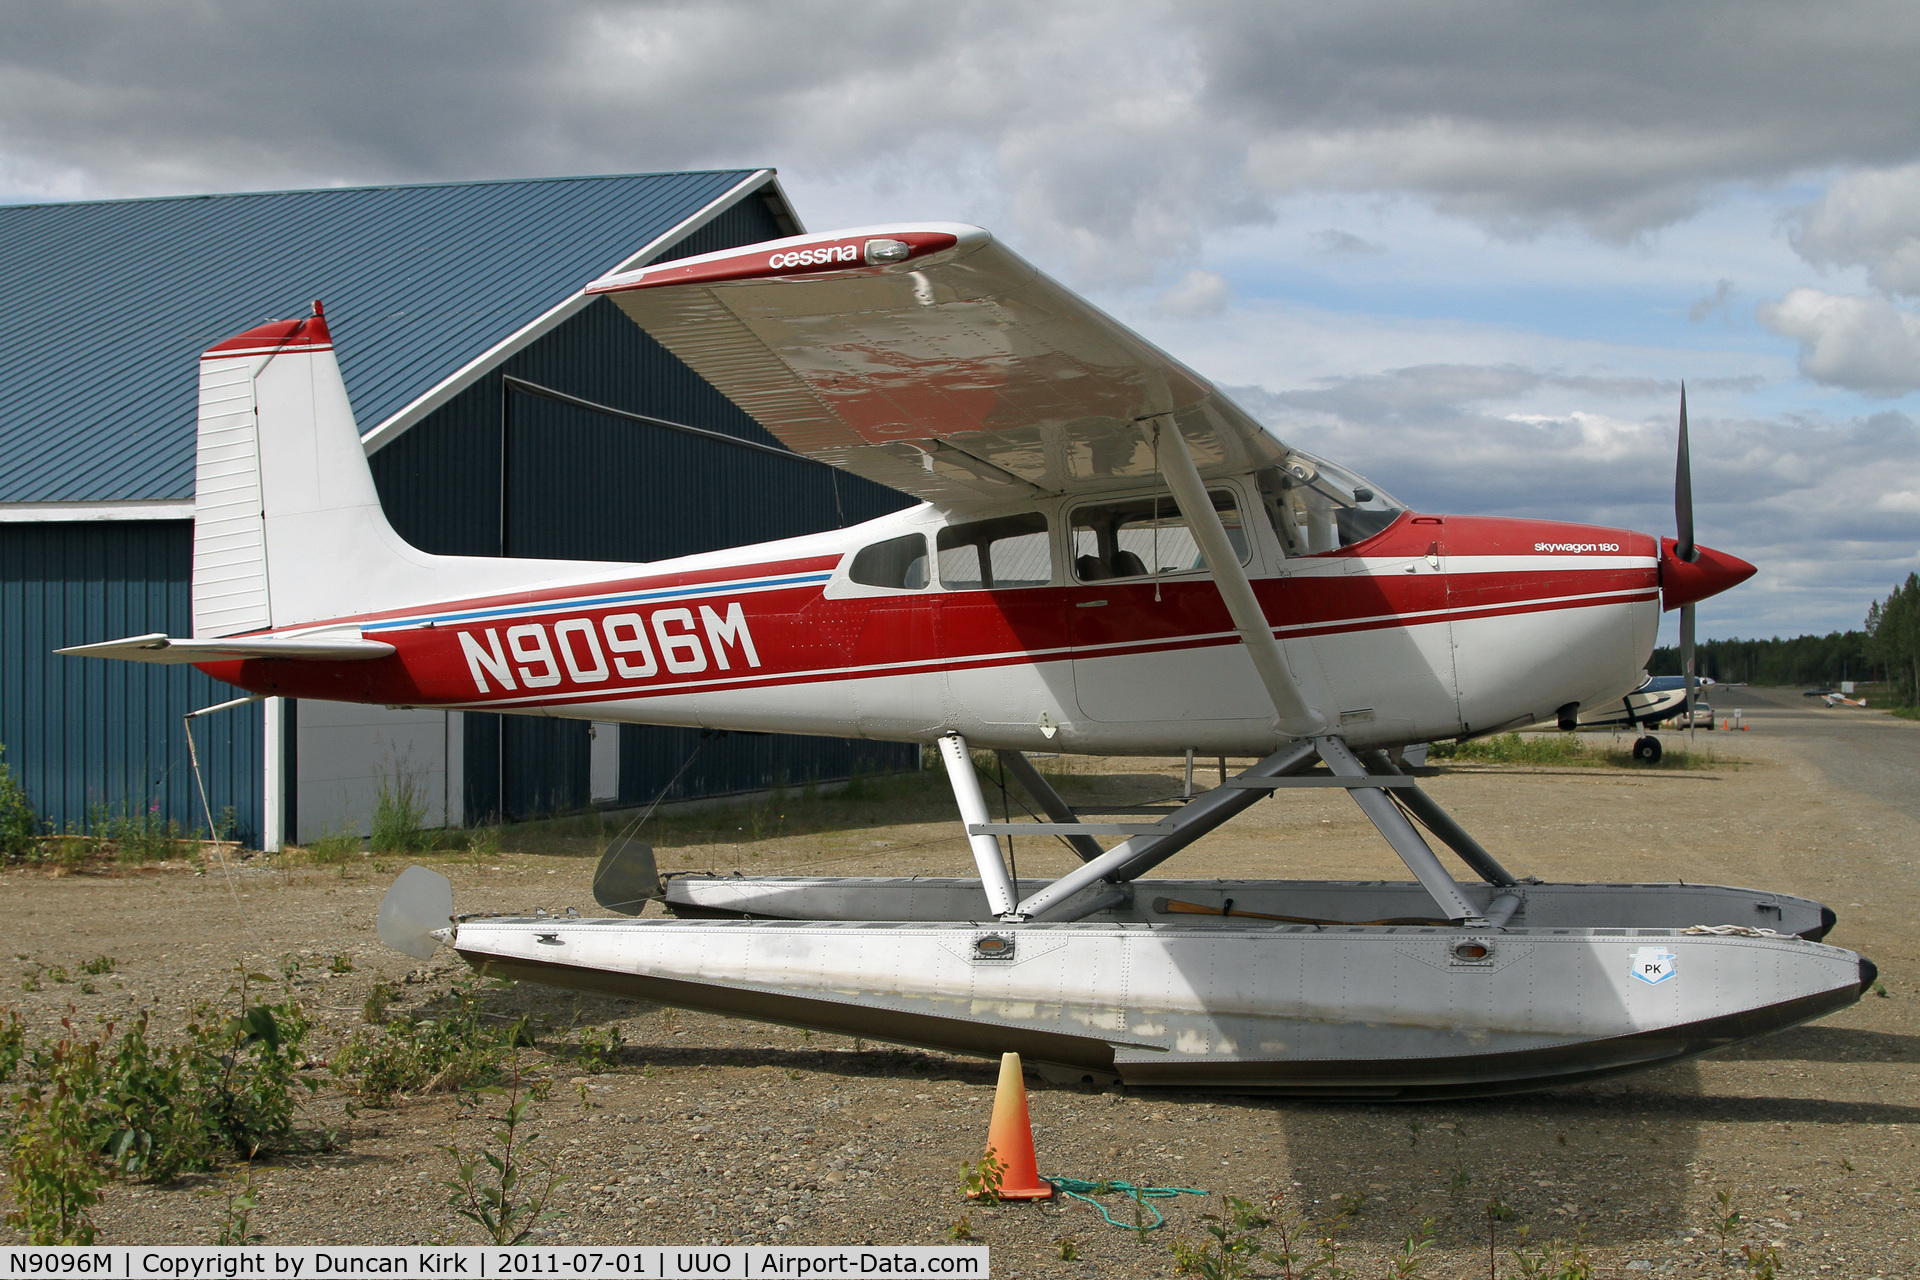 N9096M, 1971 Cessna 180H Skywagon C/N 18052196, Another float Cessna 180 example